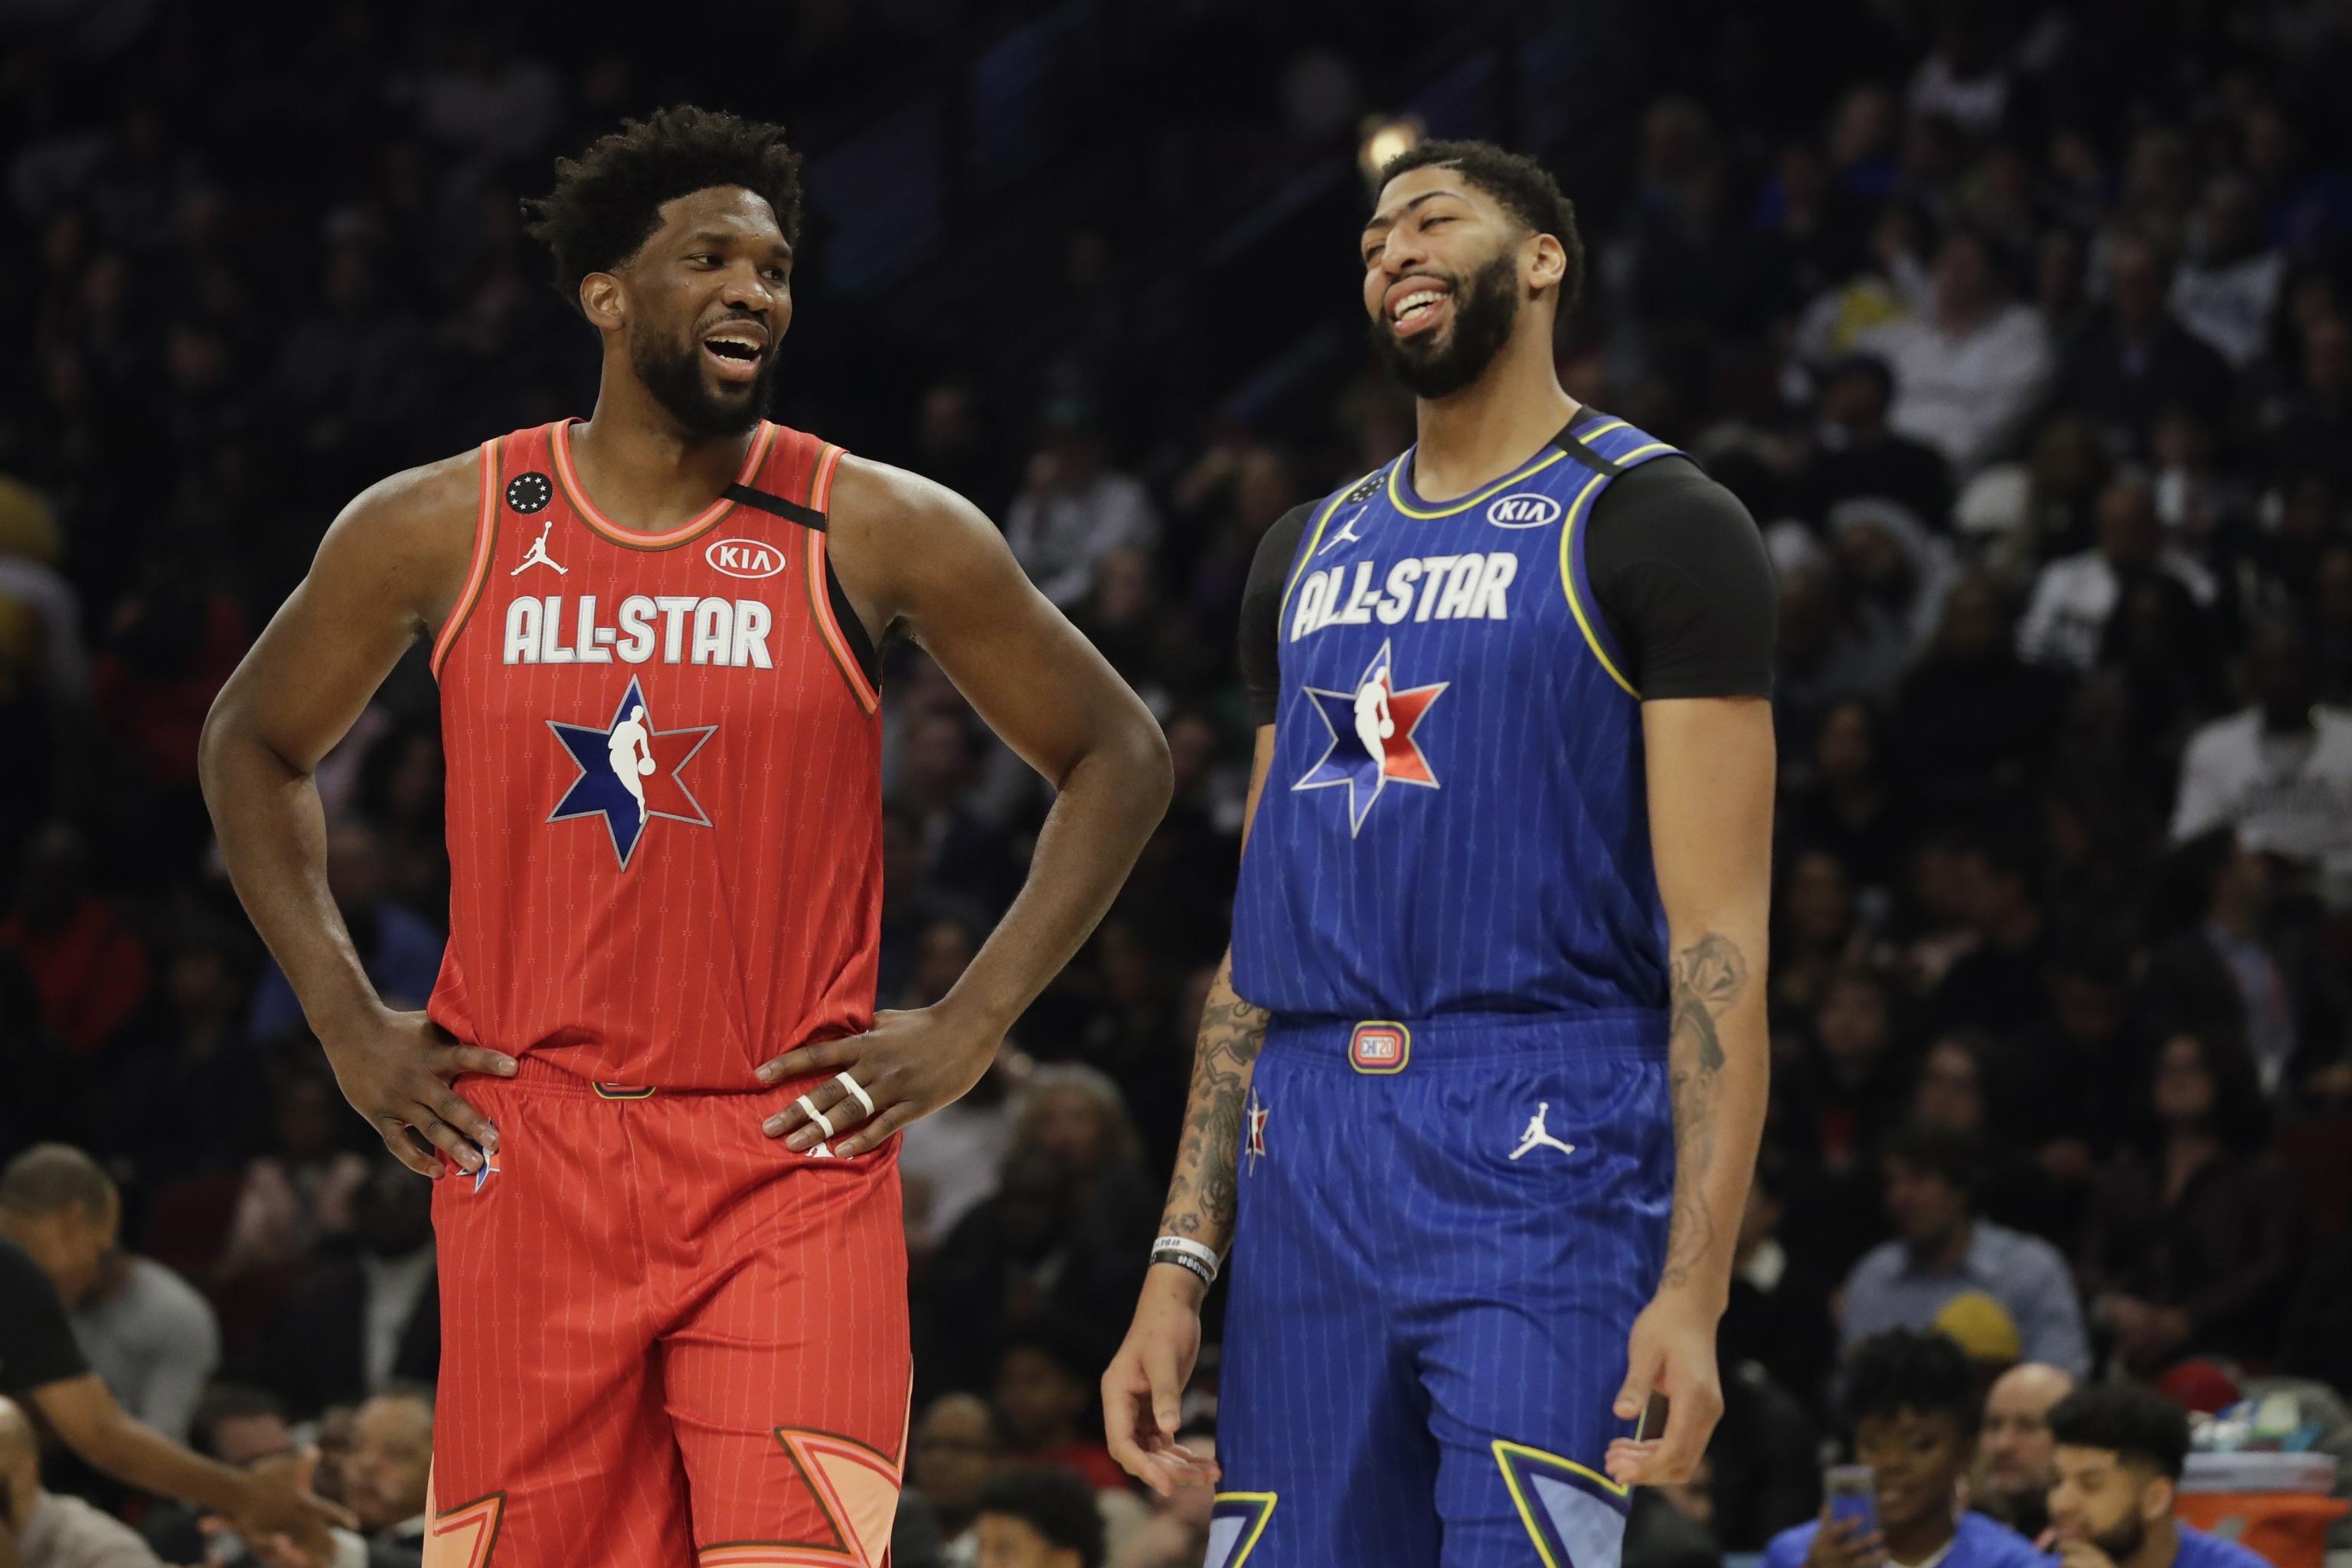 Report Nba Nbpa Agree To Hold 2021 All Star Game On March 7 In Atlanta Bleacher Report Latest News Videos And Highlights